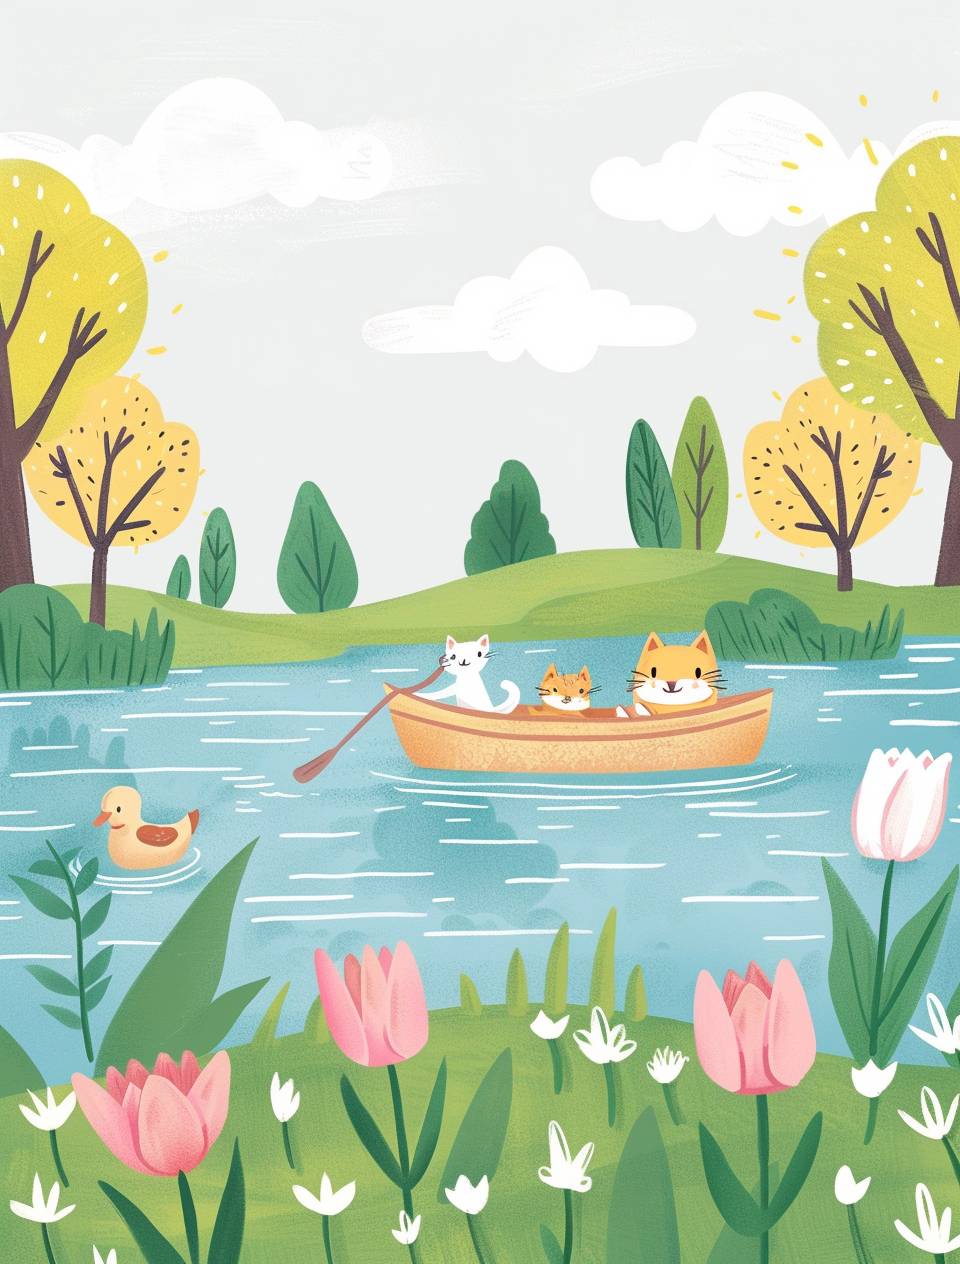 A cute cartoon illustration of some animals in the lake, green grass on both sides and trees with white clouds above them. A small boat is floating across the water with two cats sitting inside it rowing. There's one duck swimming by. The ground has pink tulips growing around it. In style of Ghibli Studio, children book illustrations, pastel colors, simple line drawings, clean lines, flat color, no shading.